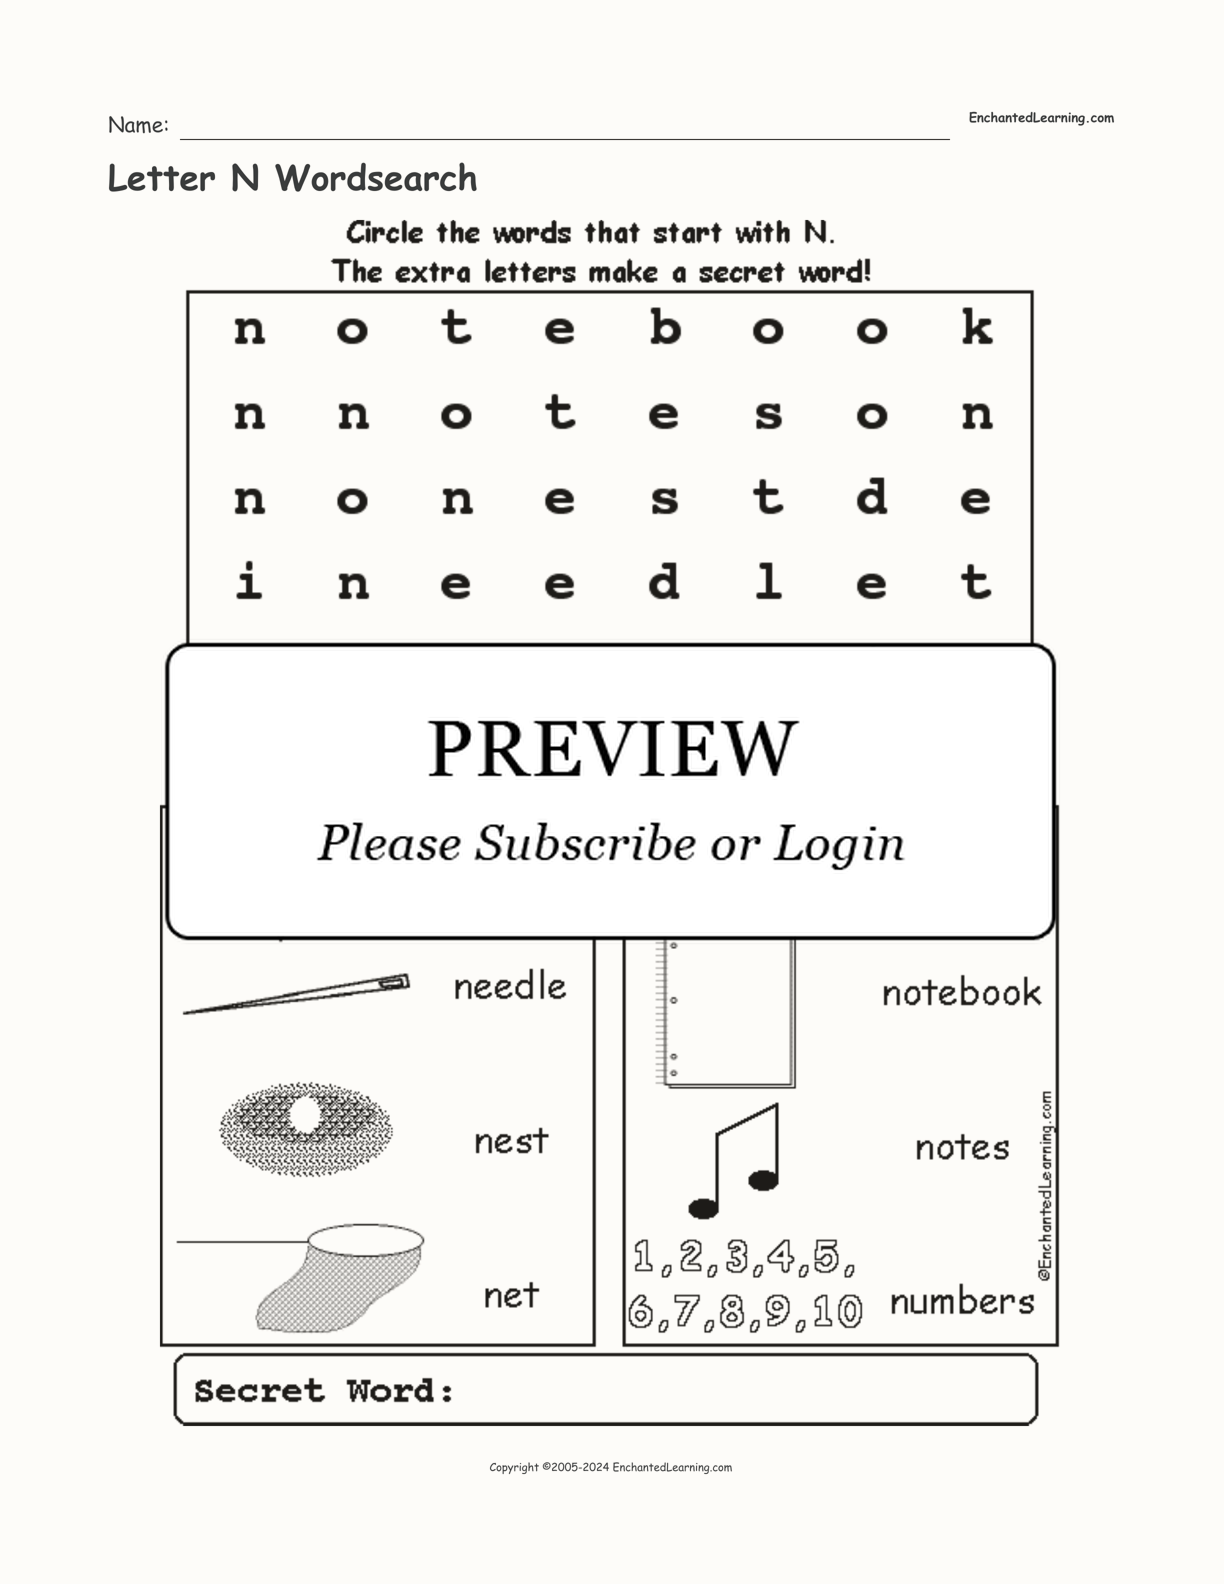 Letter N Wordsearch interactive worksheet page 1